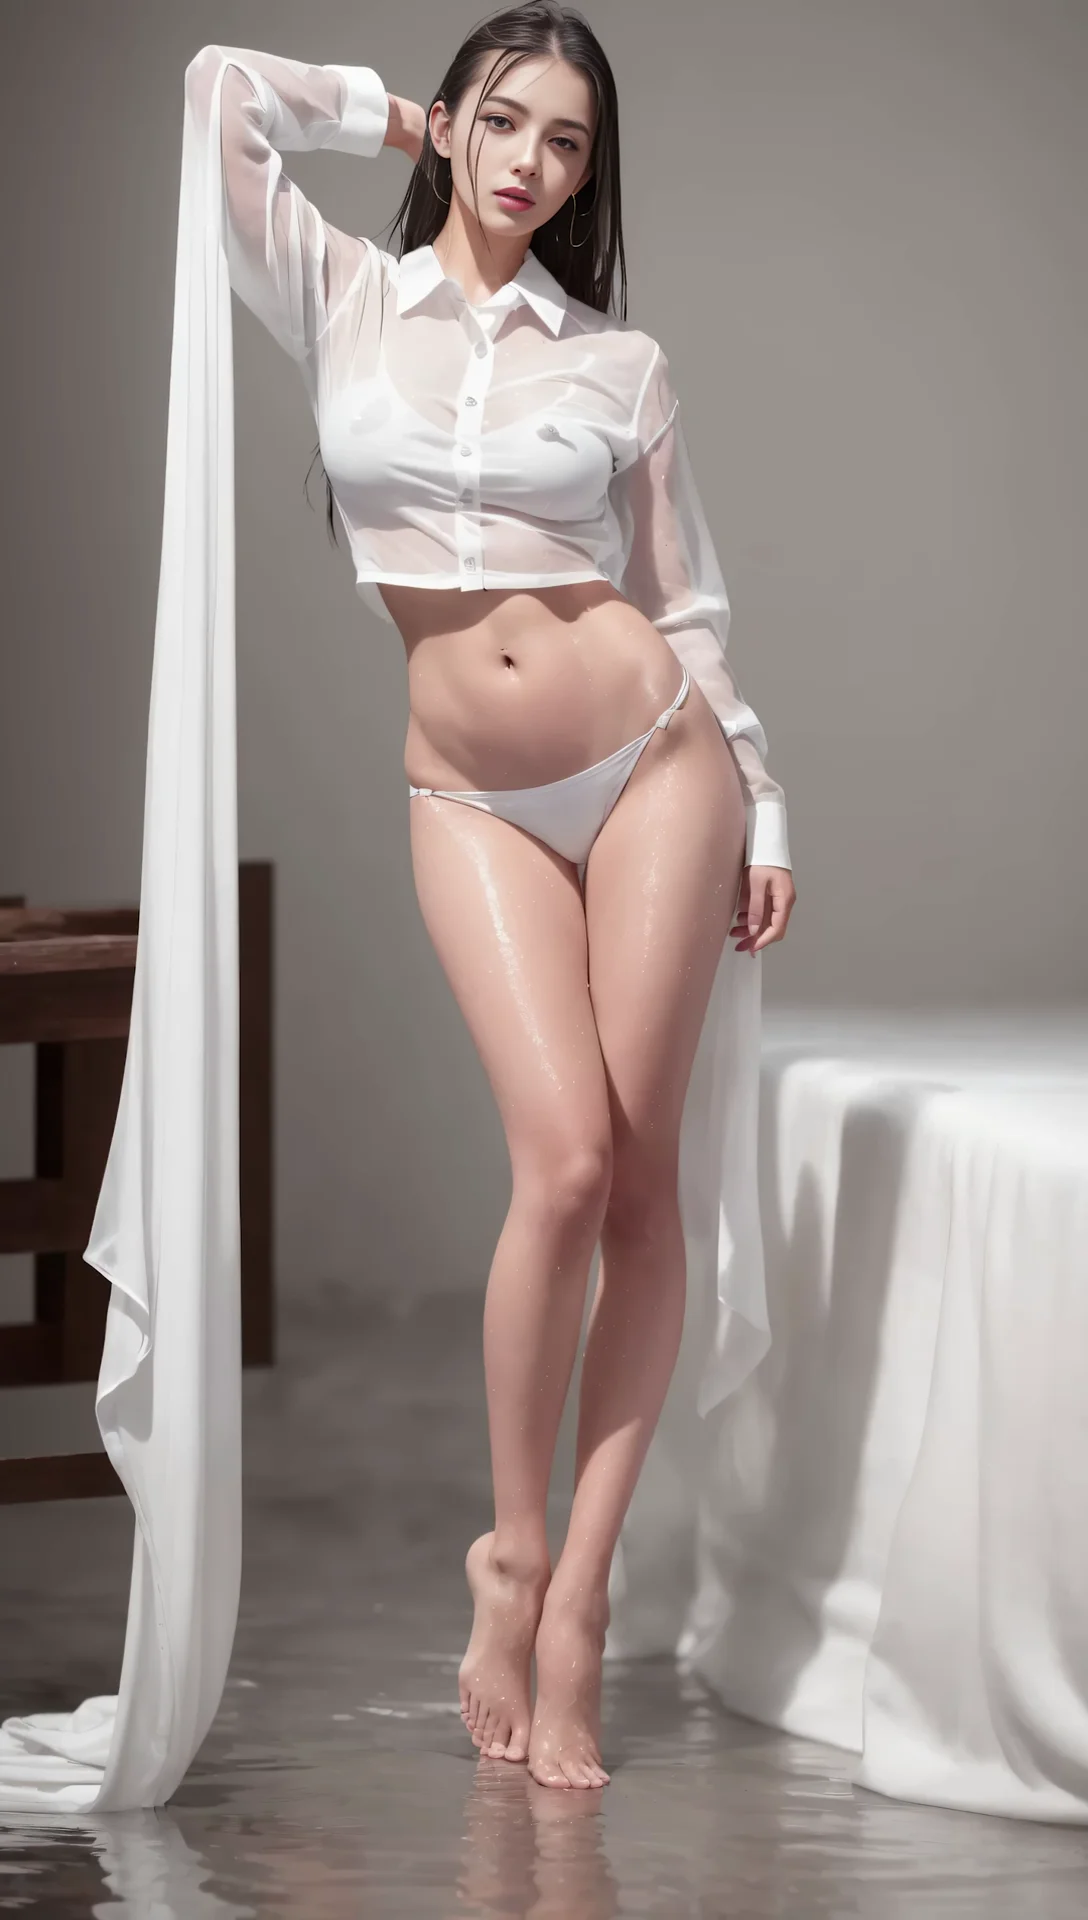 Ai Lookbook Beautiful Girl In A White Shirt And Panties Image 23